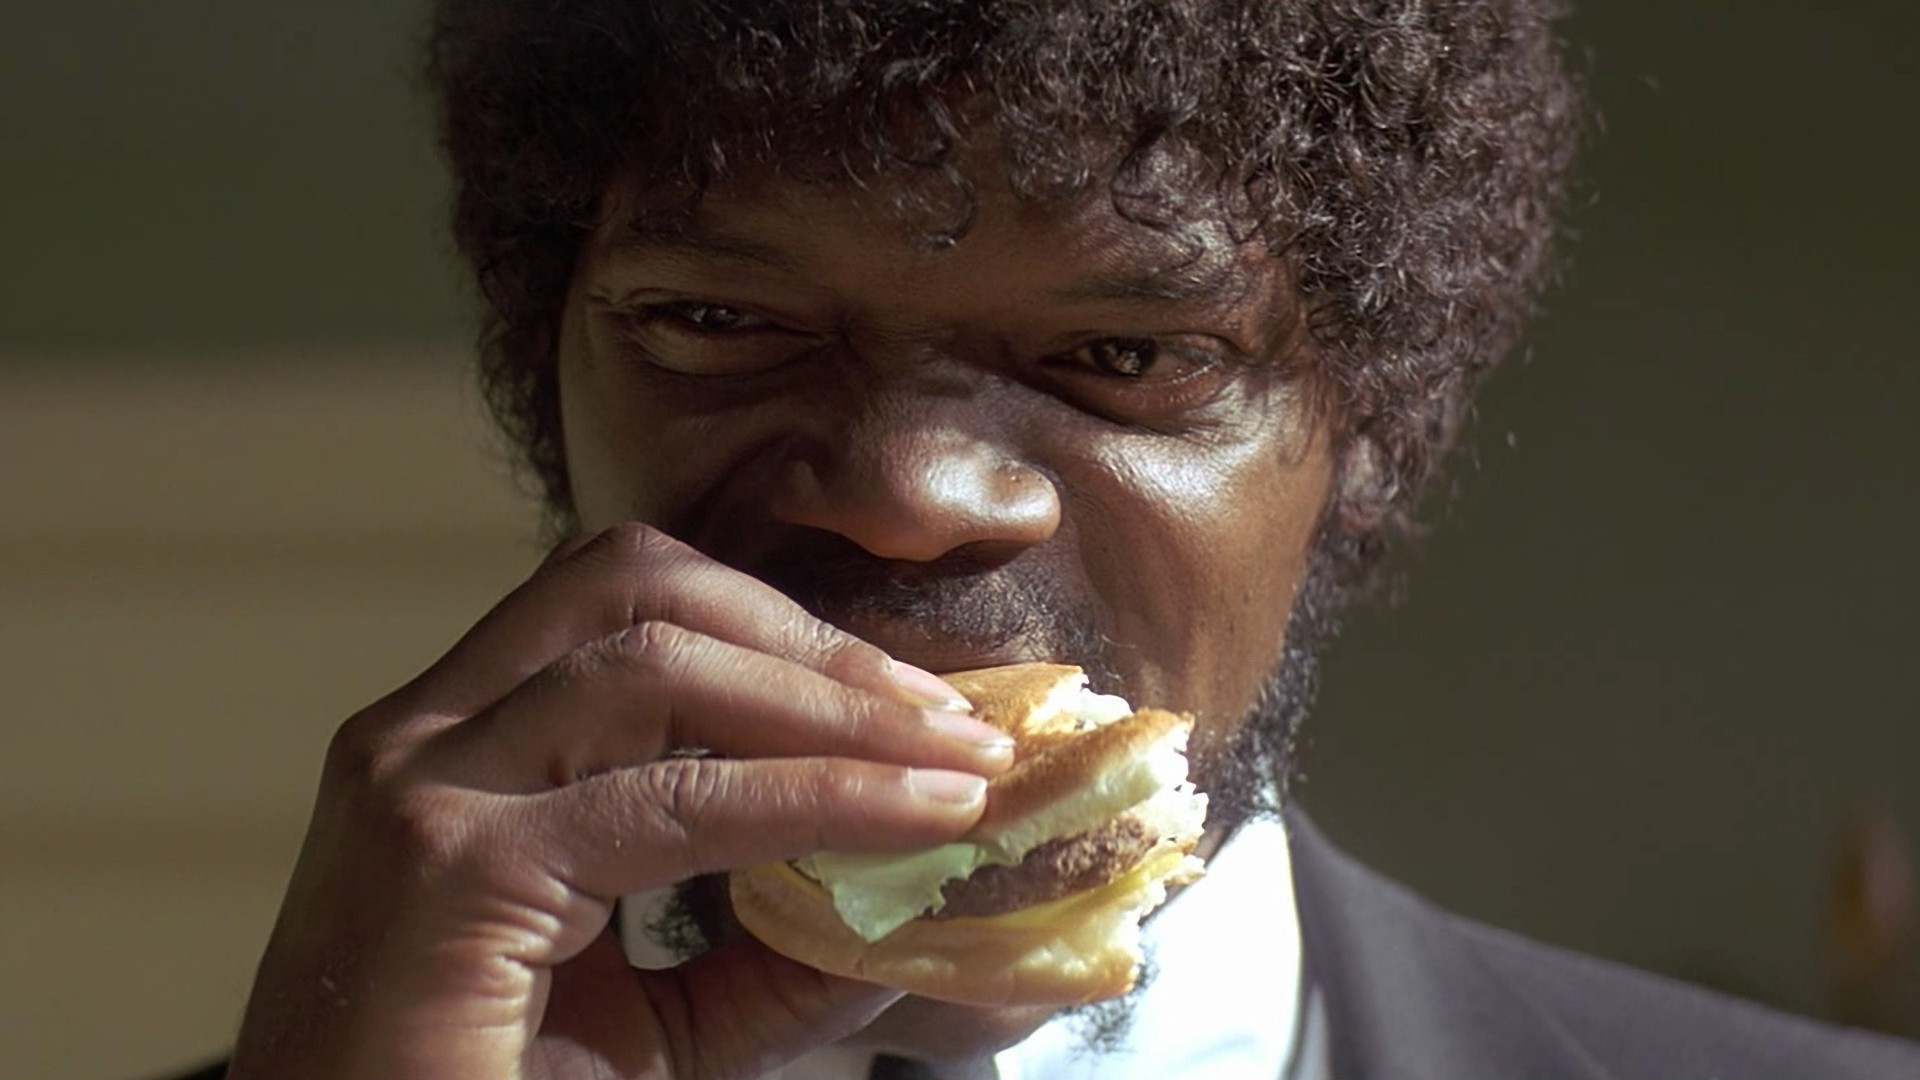 1920x1080 Wallpaper : px, burgers, eating, movies, Pulp Fiction, Samuel L Jackson CoolWallpapers 1016972 HD Wallpapers